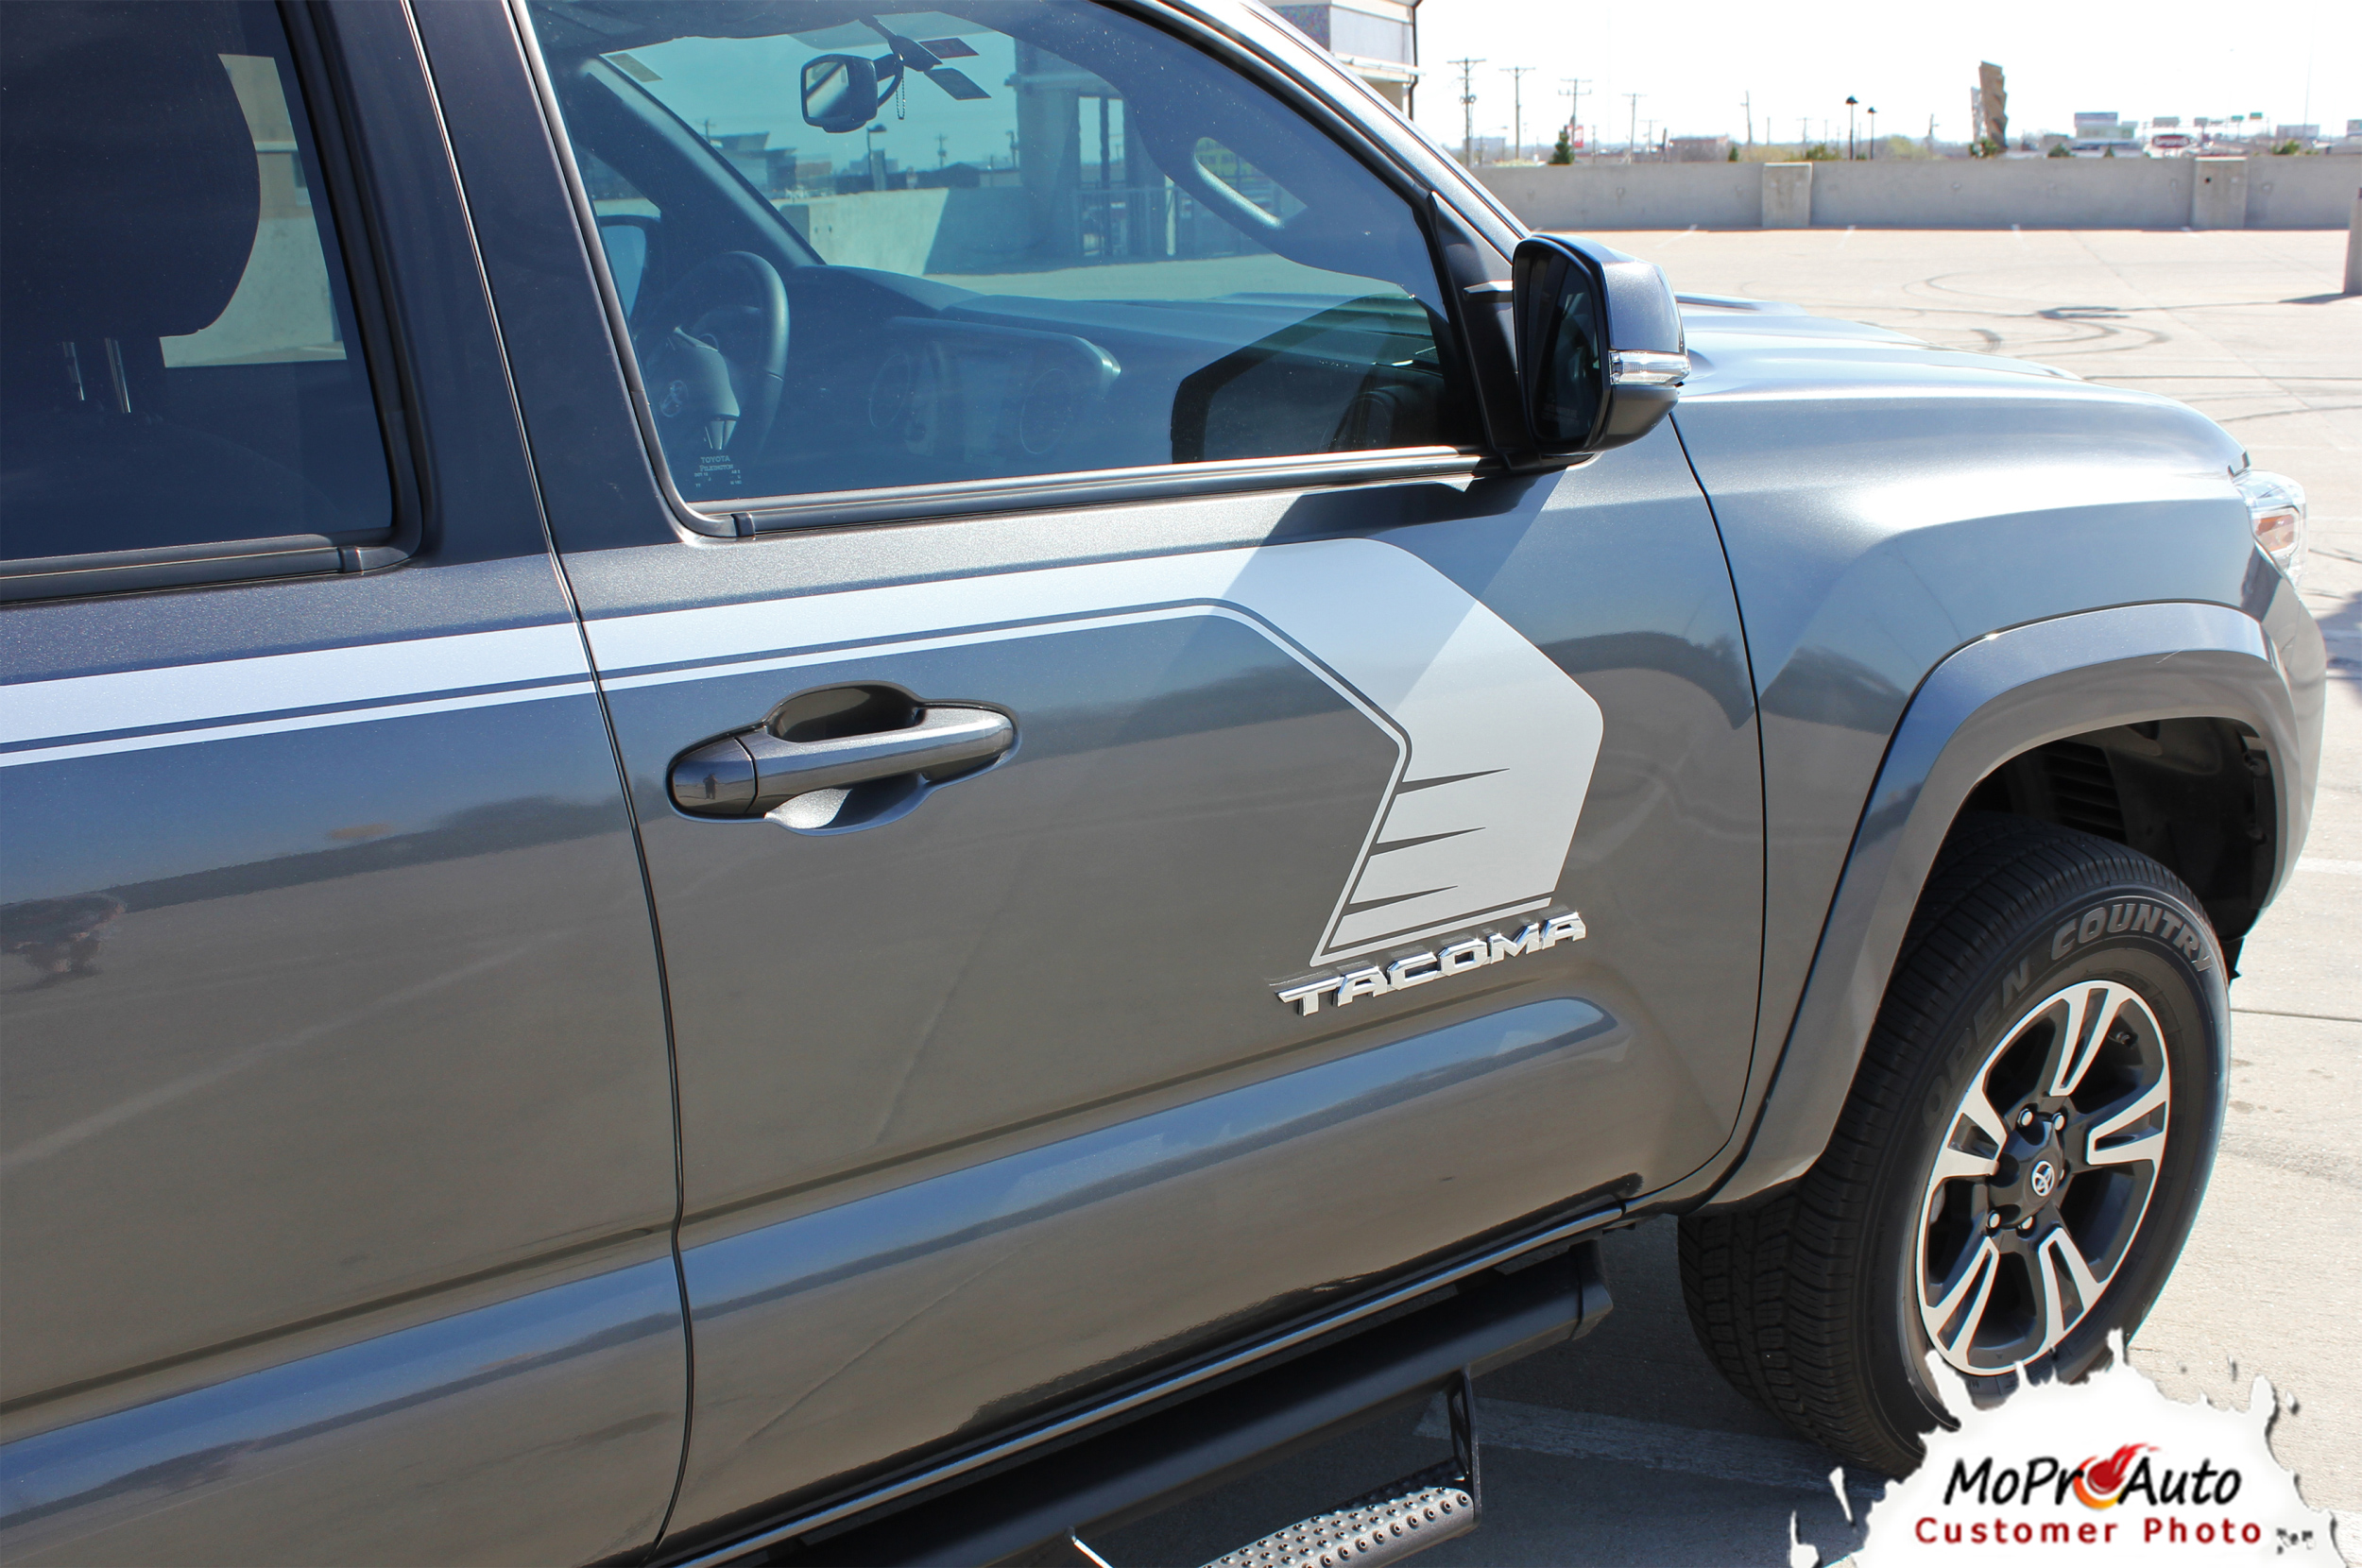 STORM - Toyota Tacoma Truck TRD Sport Pro 3M 1080 Vinyl Graphics, Stripes and Decals Package by MoProAuto Pro Design Series